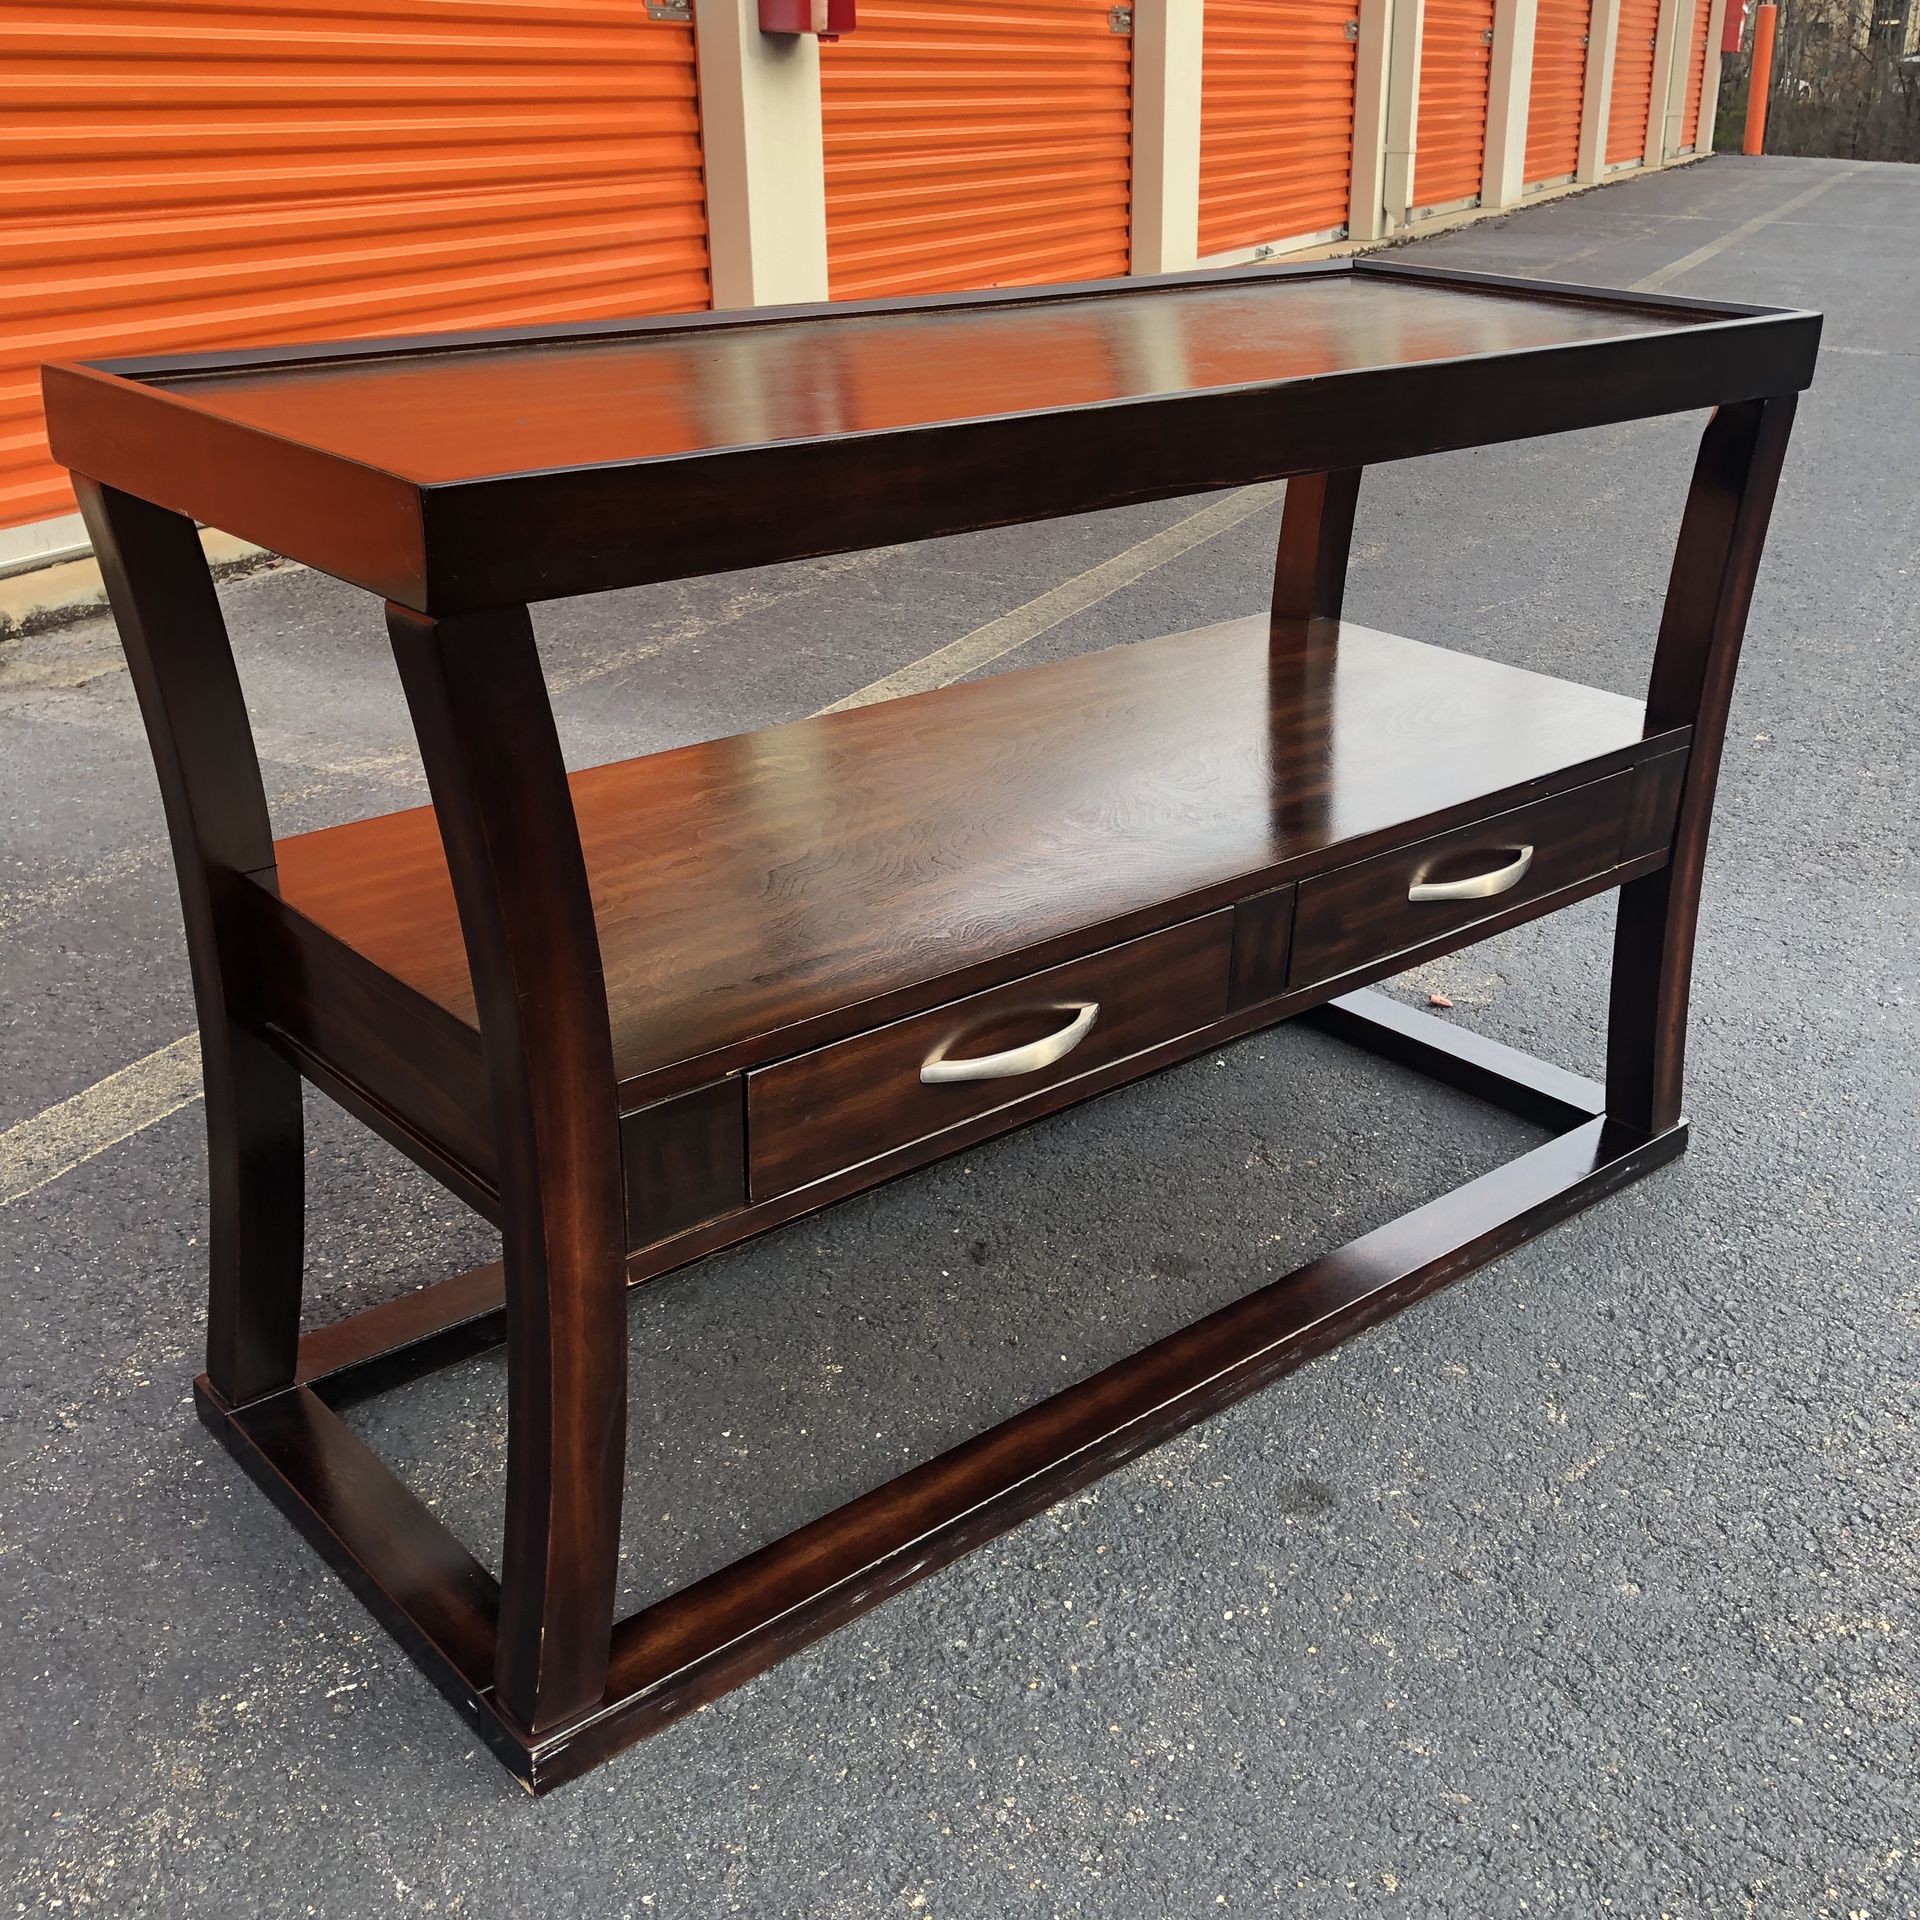 TV Stand / Console Table